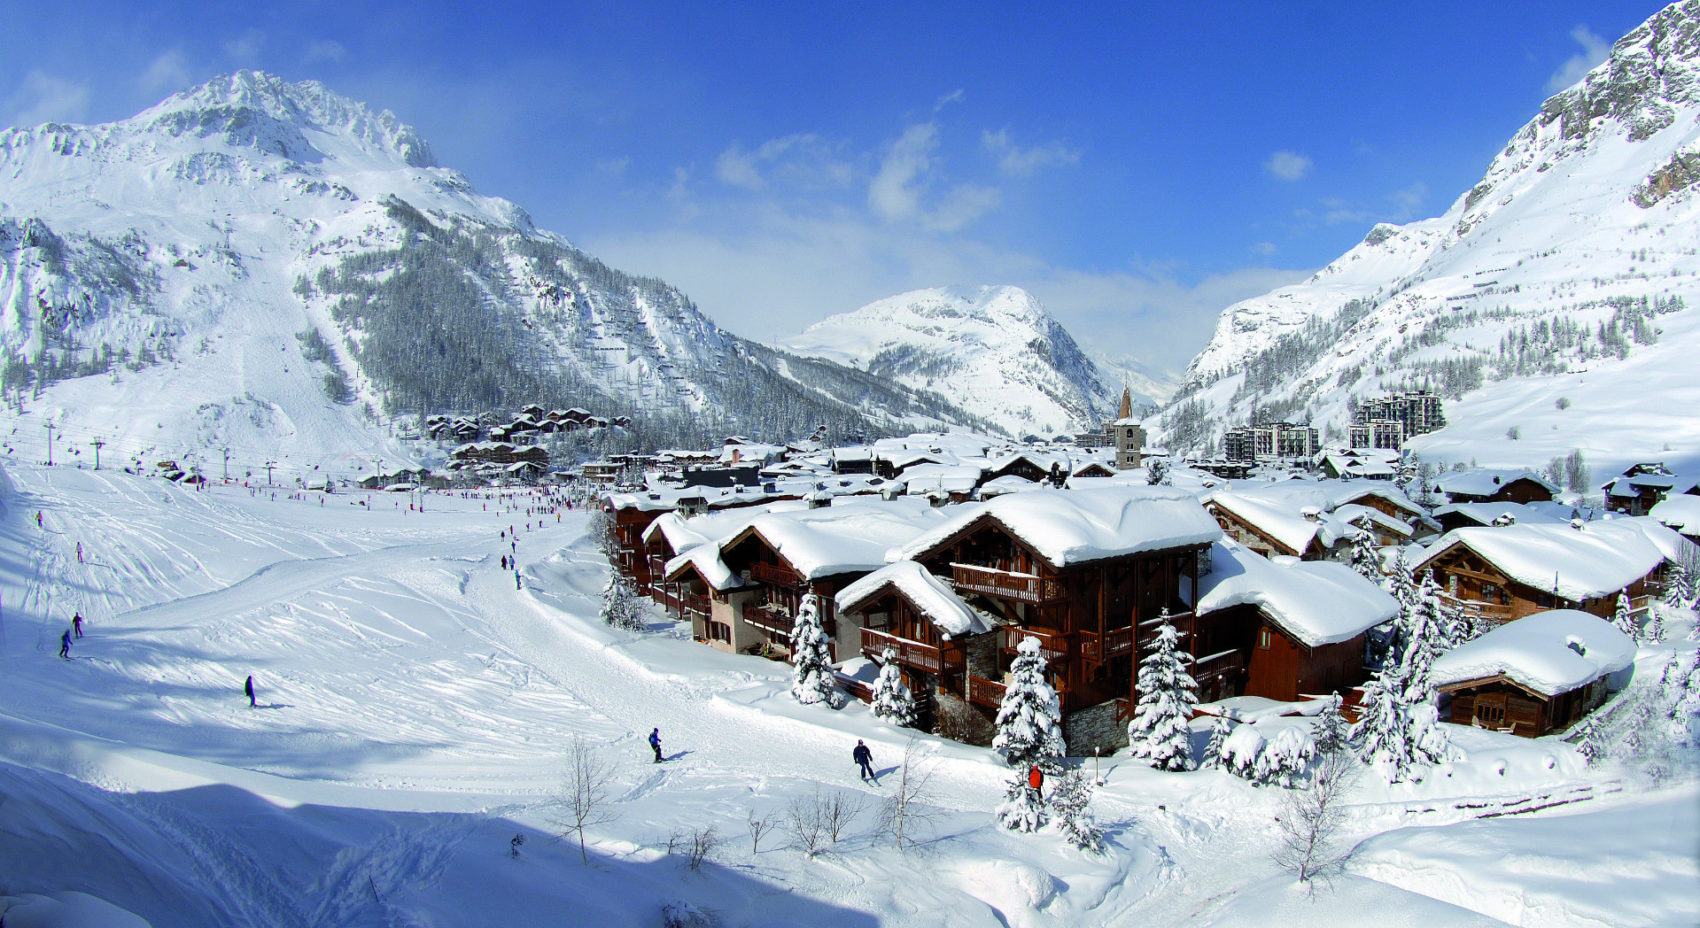 Val d' Isere is in the French Alps 